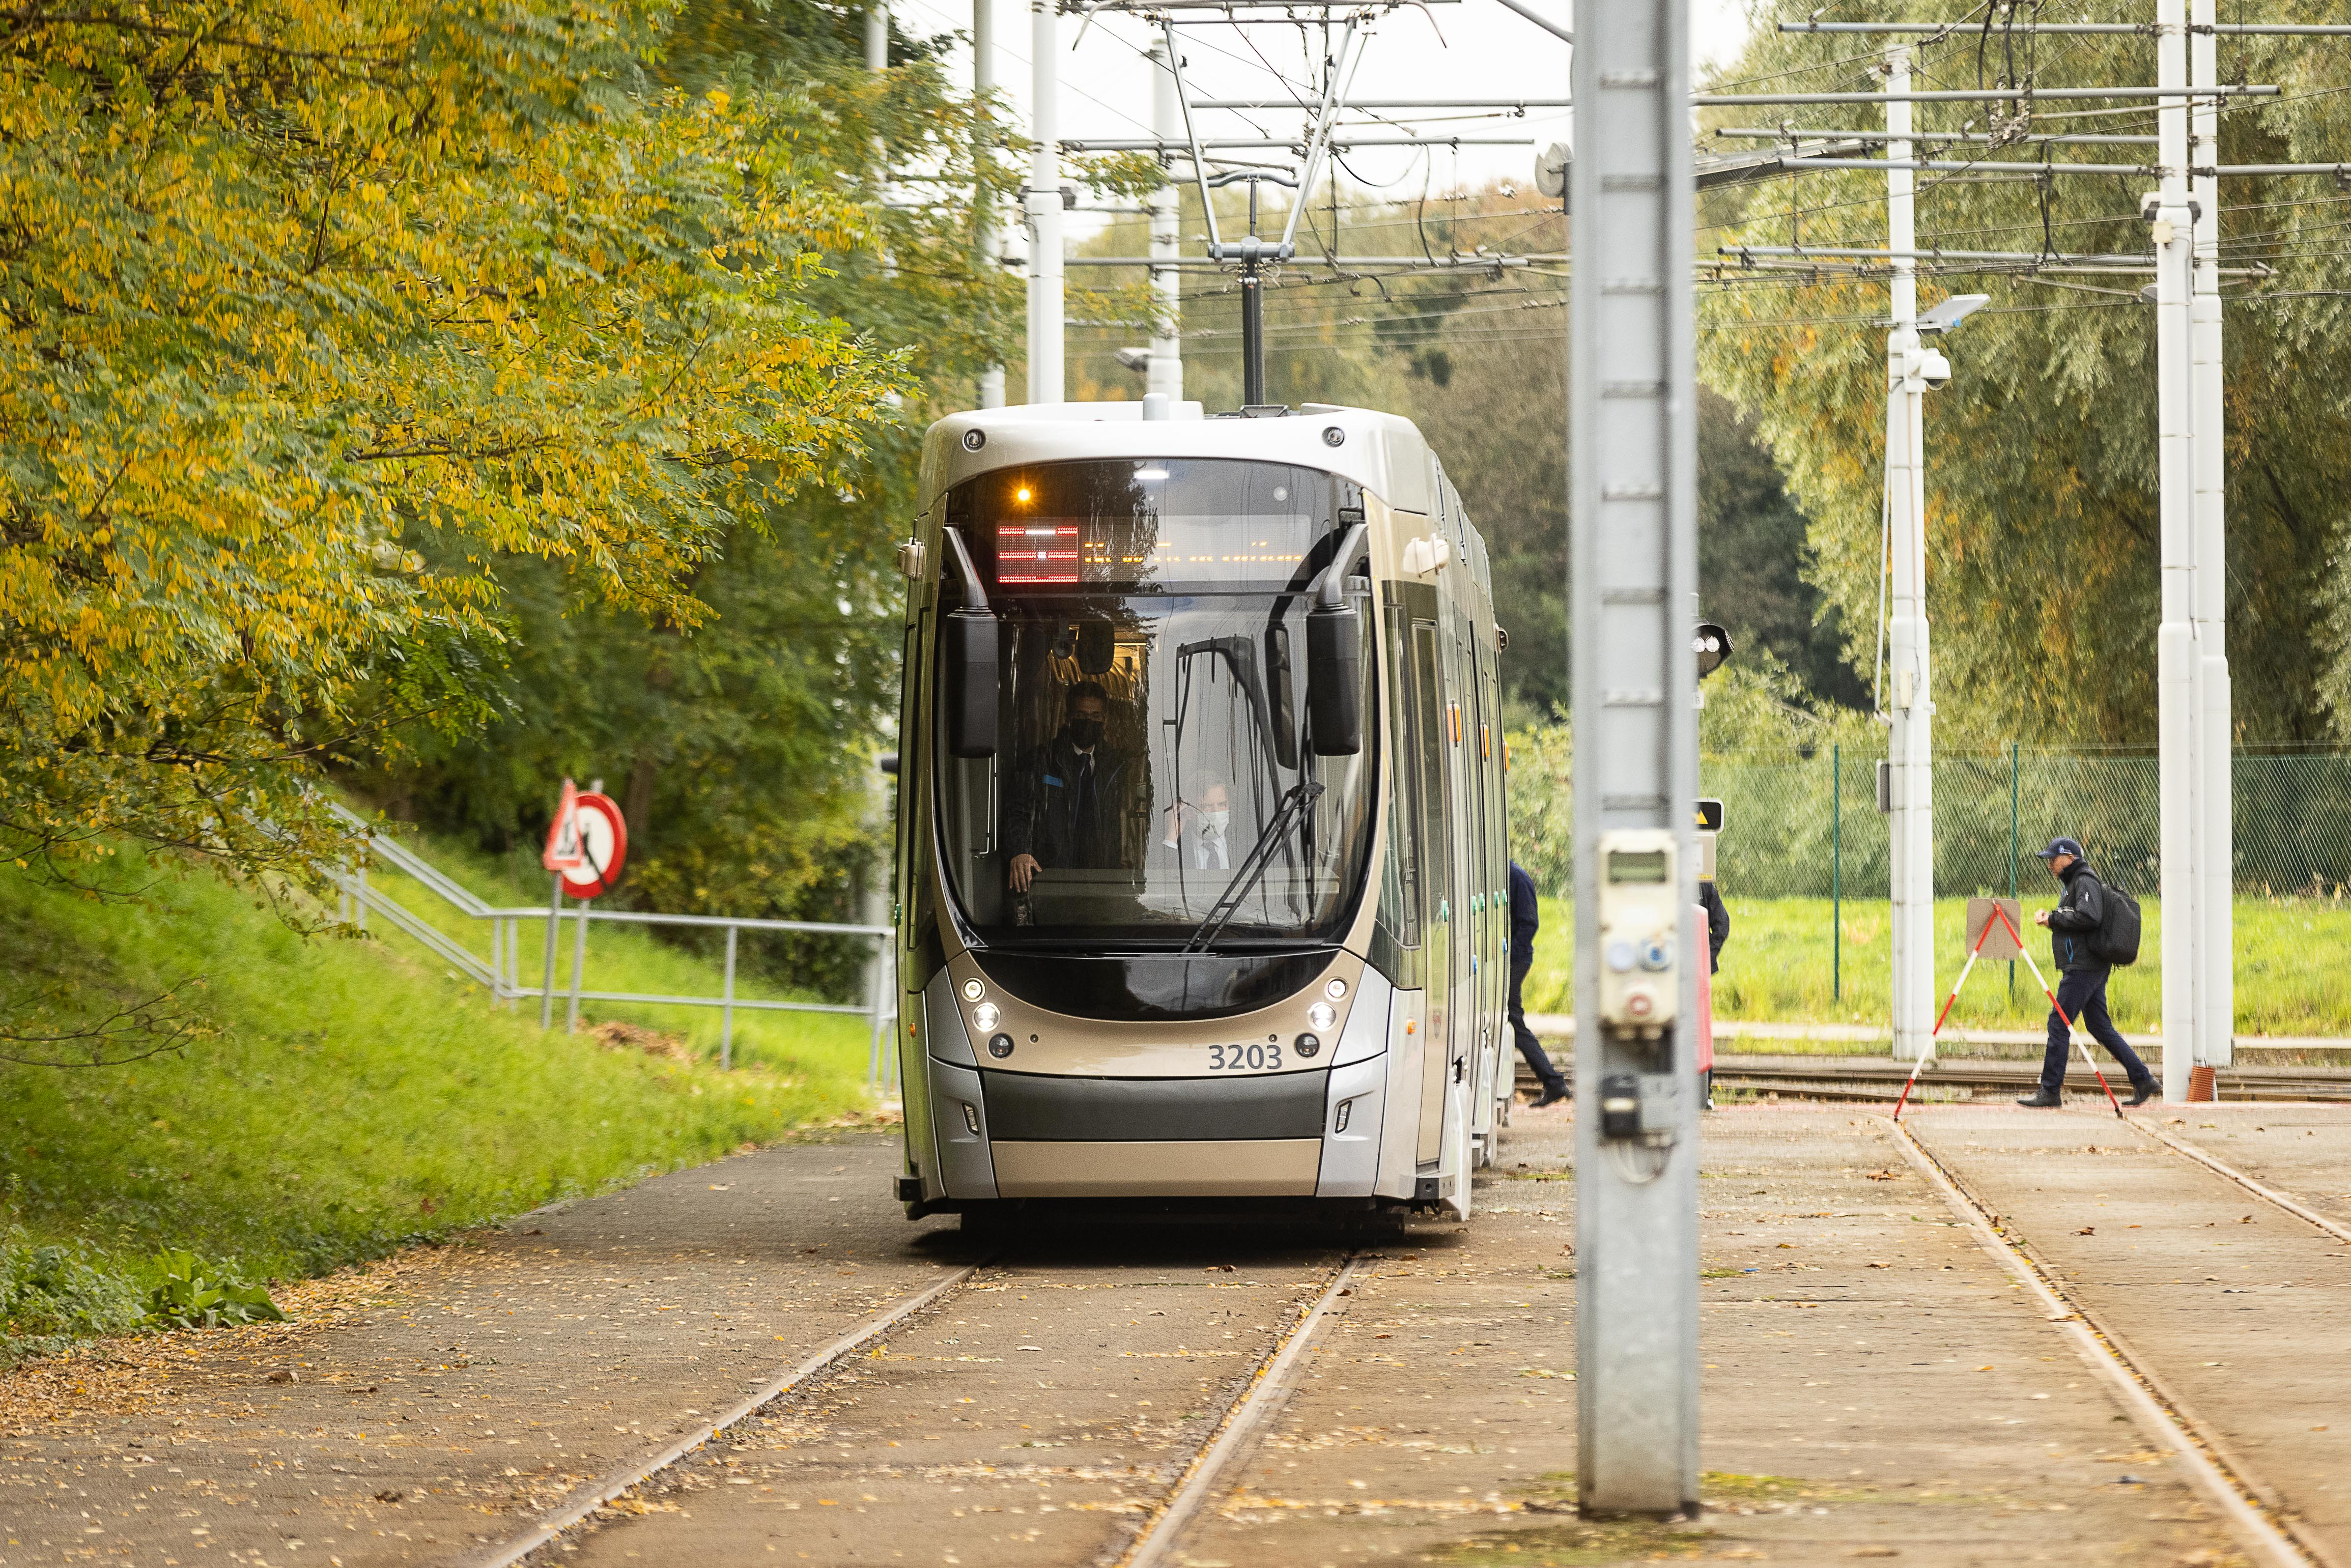 MIVB/STIB applies for building permit for future tram line 10